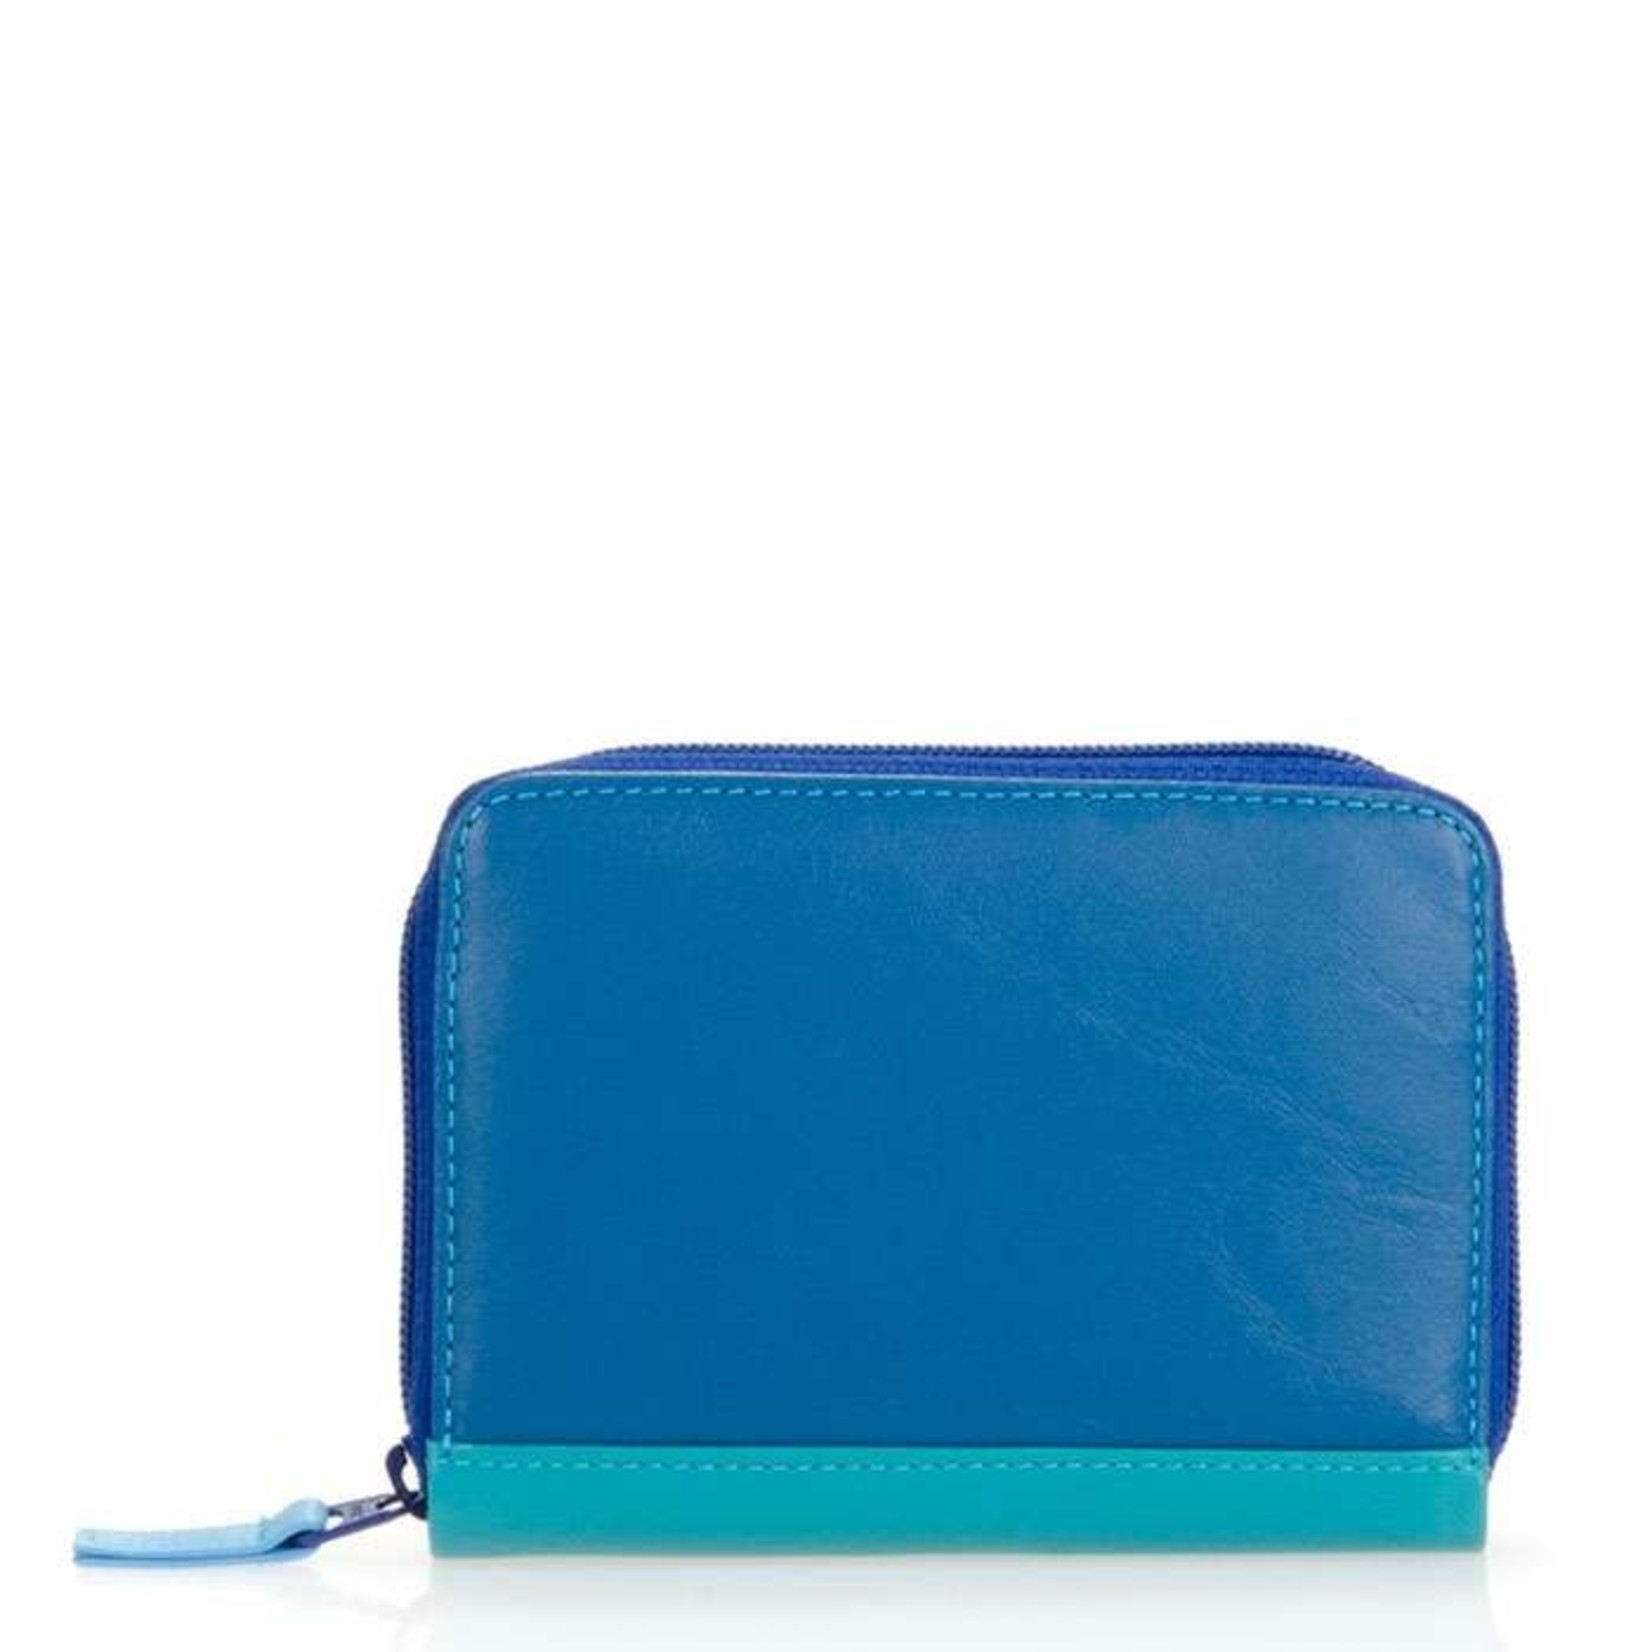 Mywalit Mywalit Zipped Credit Card Holder